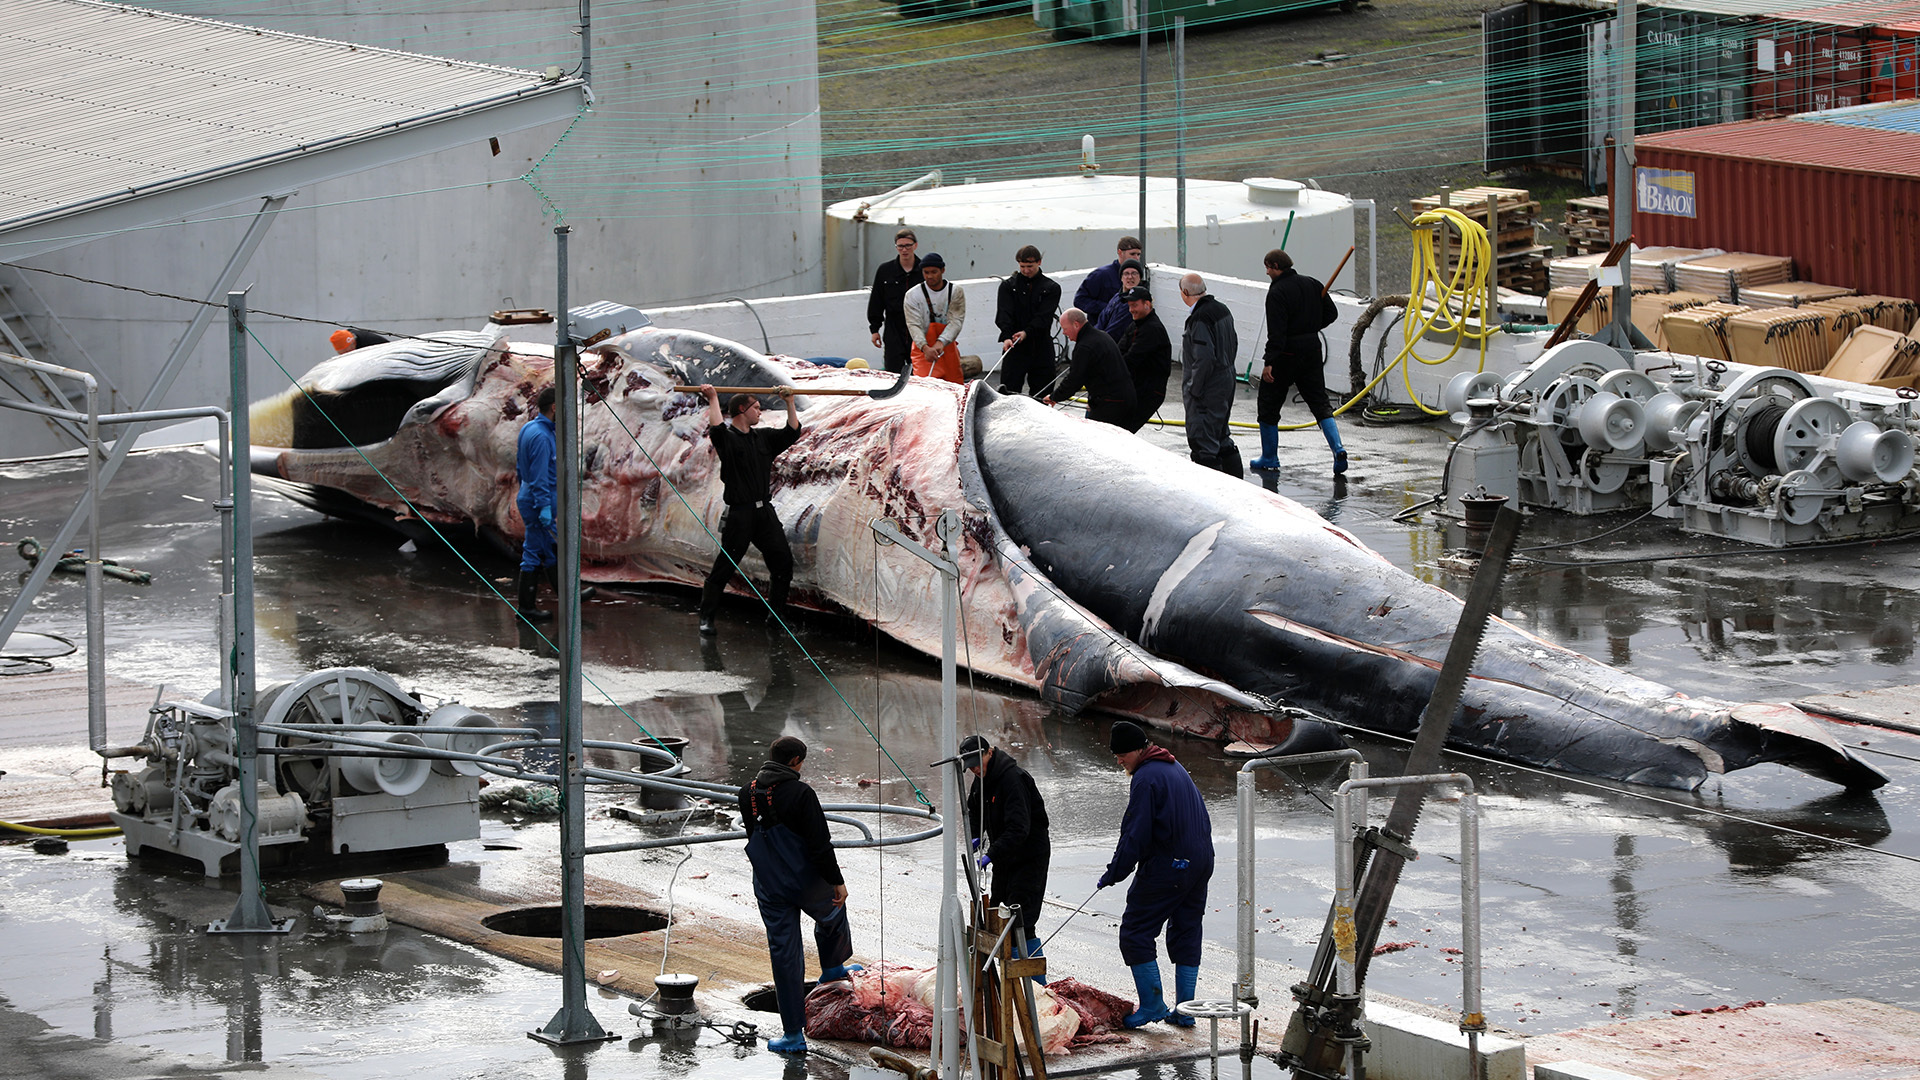 The endangered fin whale faces renewed threats from whaling, as Iceland and Japan have approved new permits to hunt them.